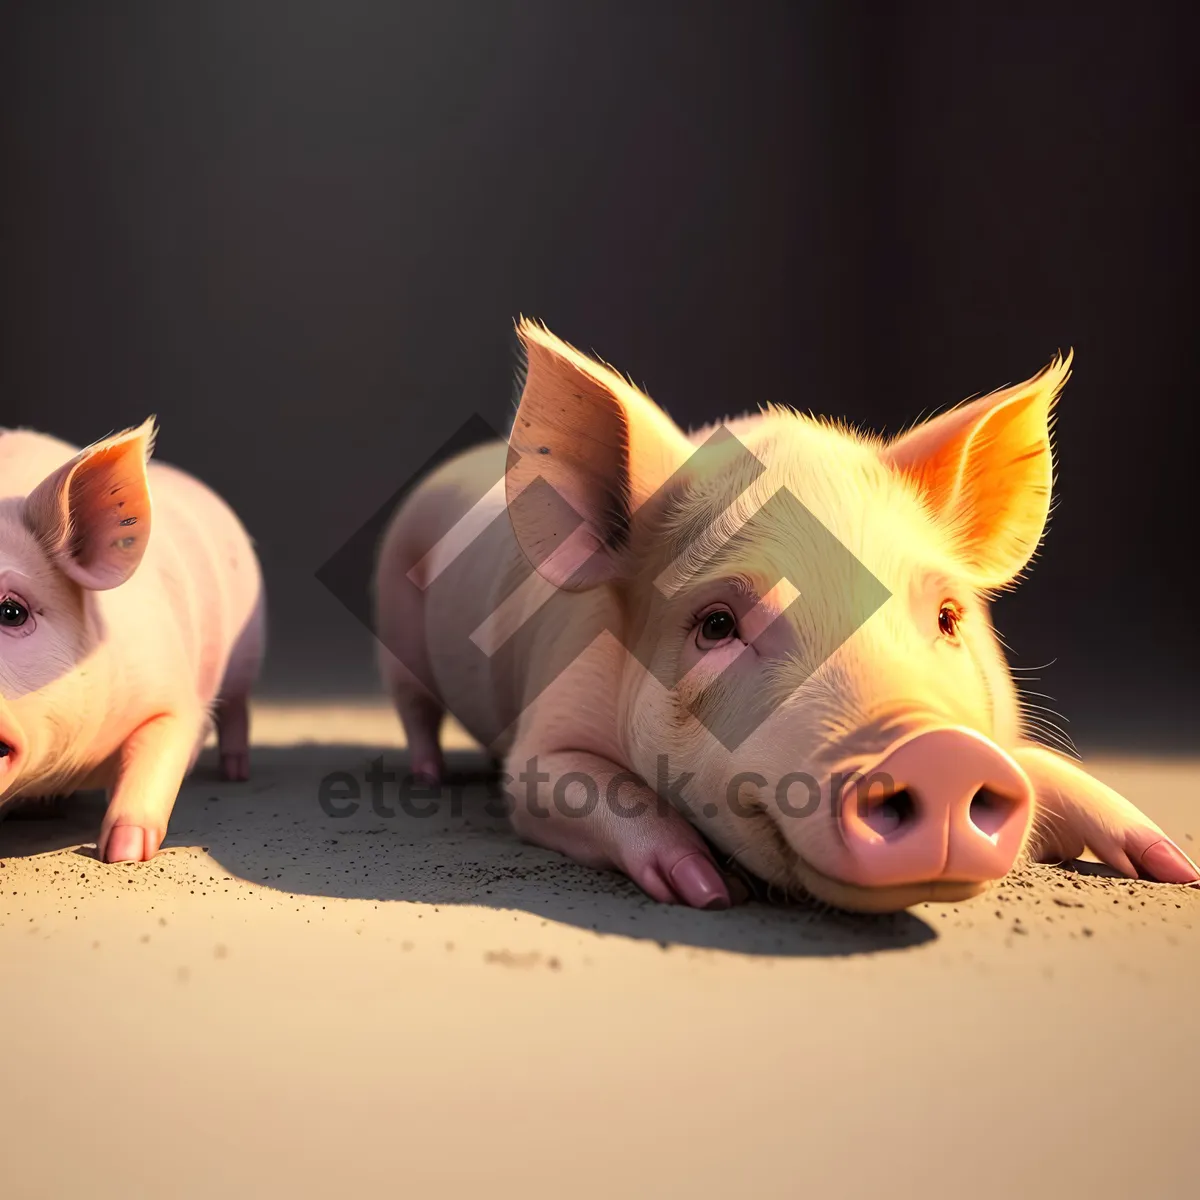 Picture of Piglet Savings: Investing in Wealth through the Pink Piggy Bank